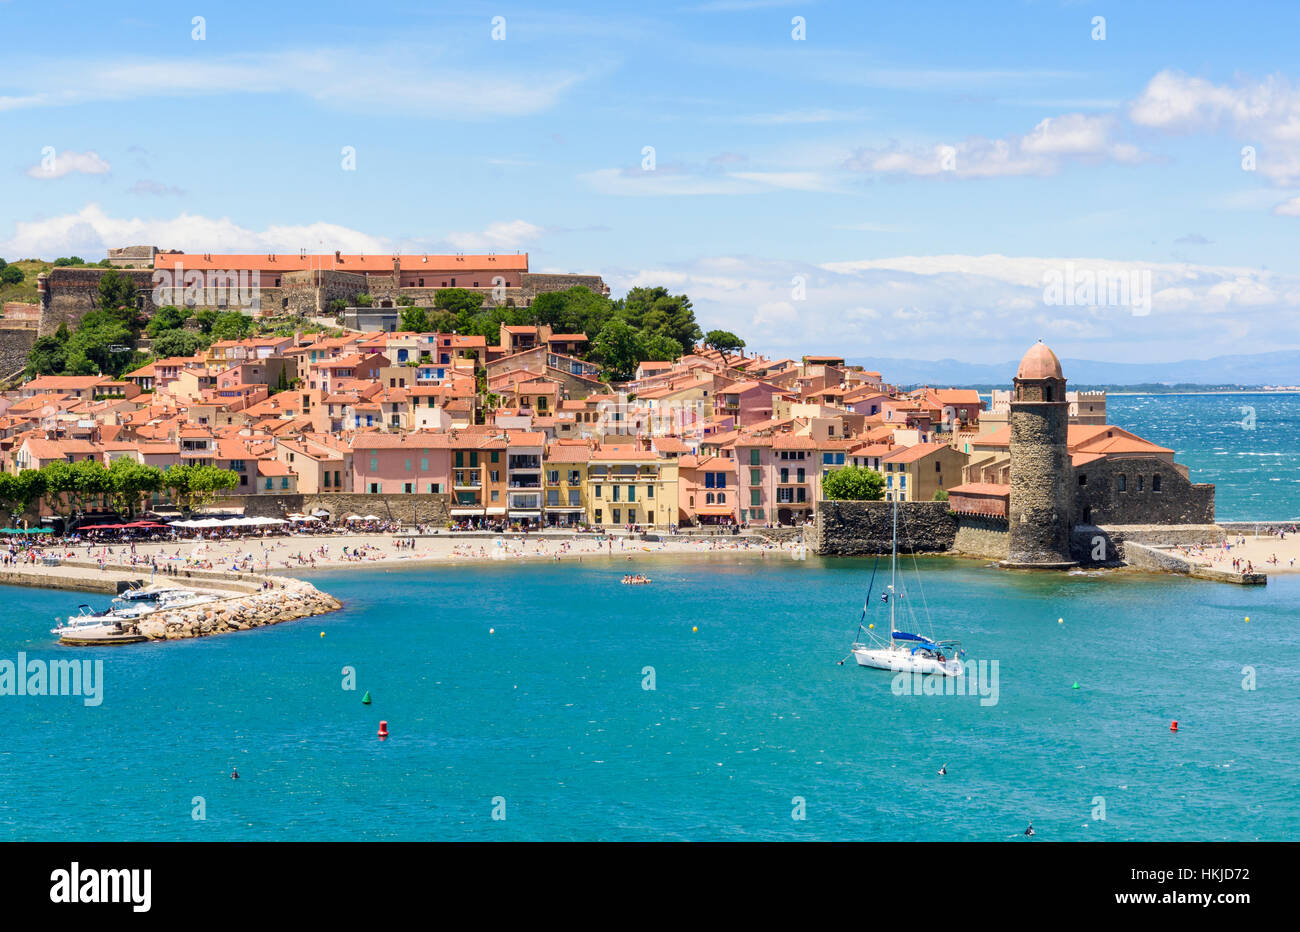 Collioure old town and landmark bell tower of Notre Dame des Anges and yacht moored in the bay, Collioure, Côte Vermeille, France Stock Photo